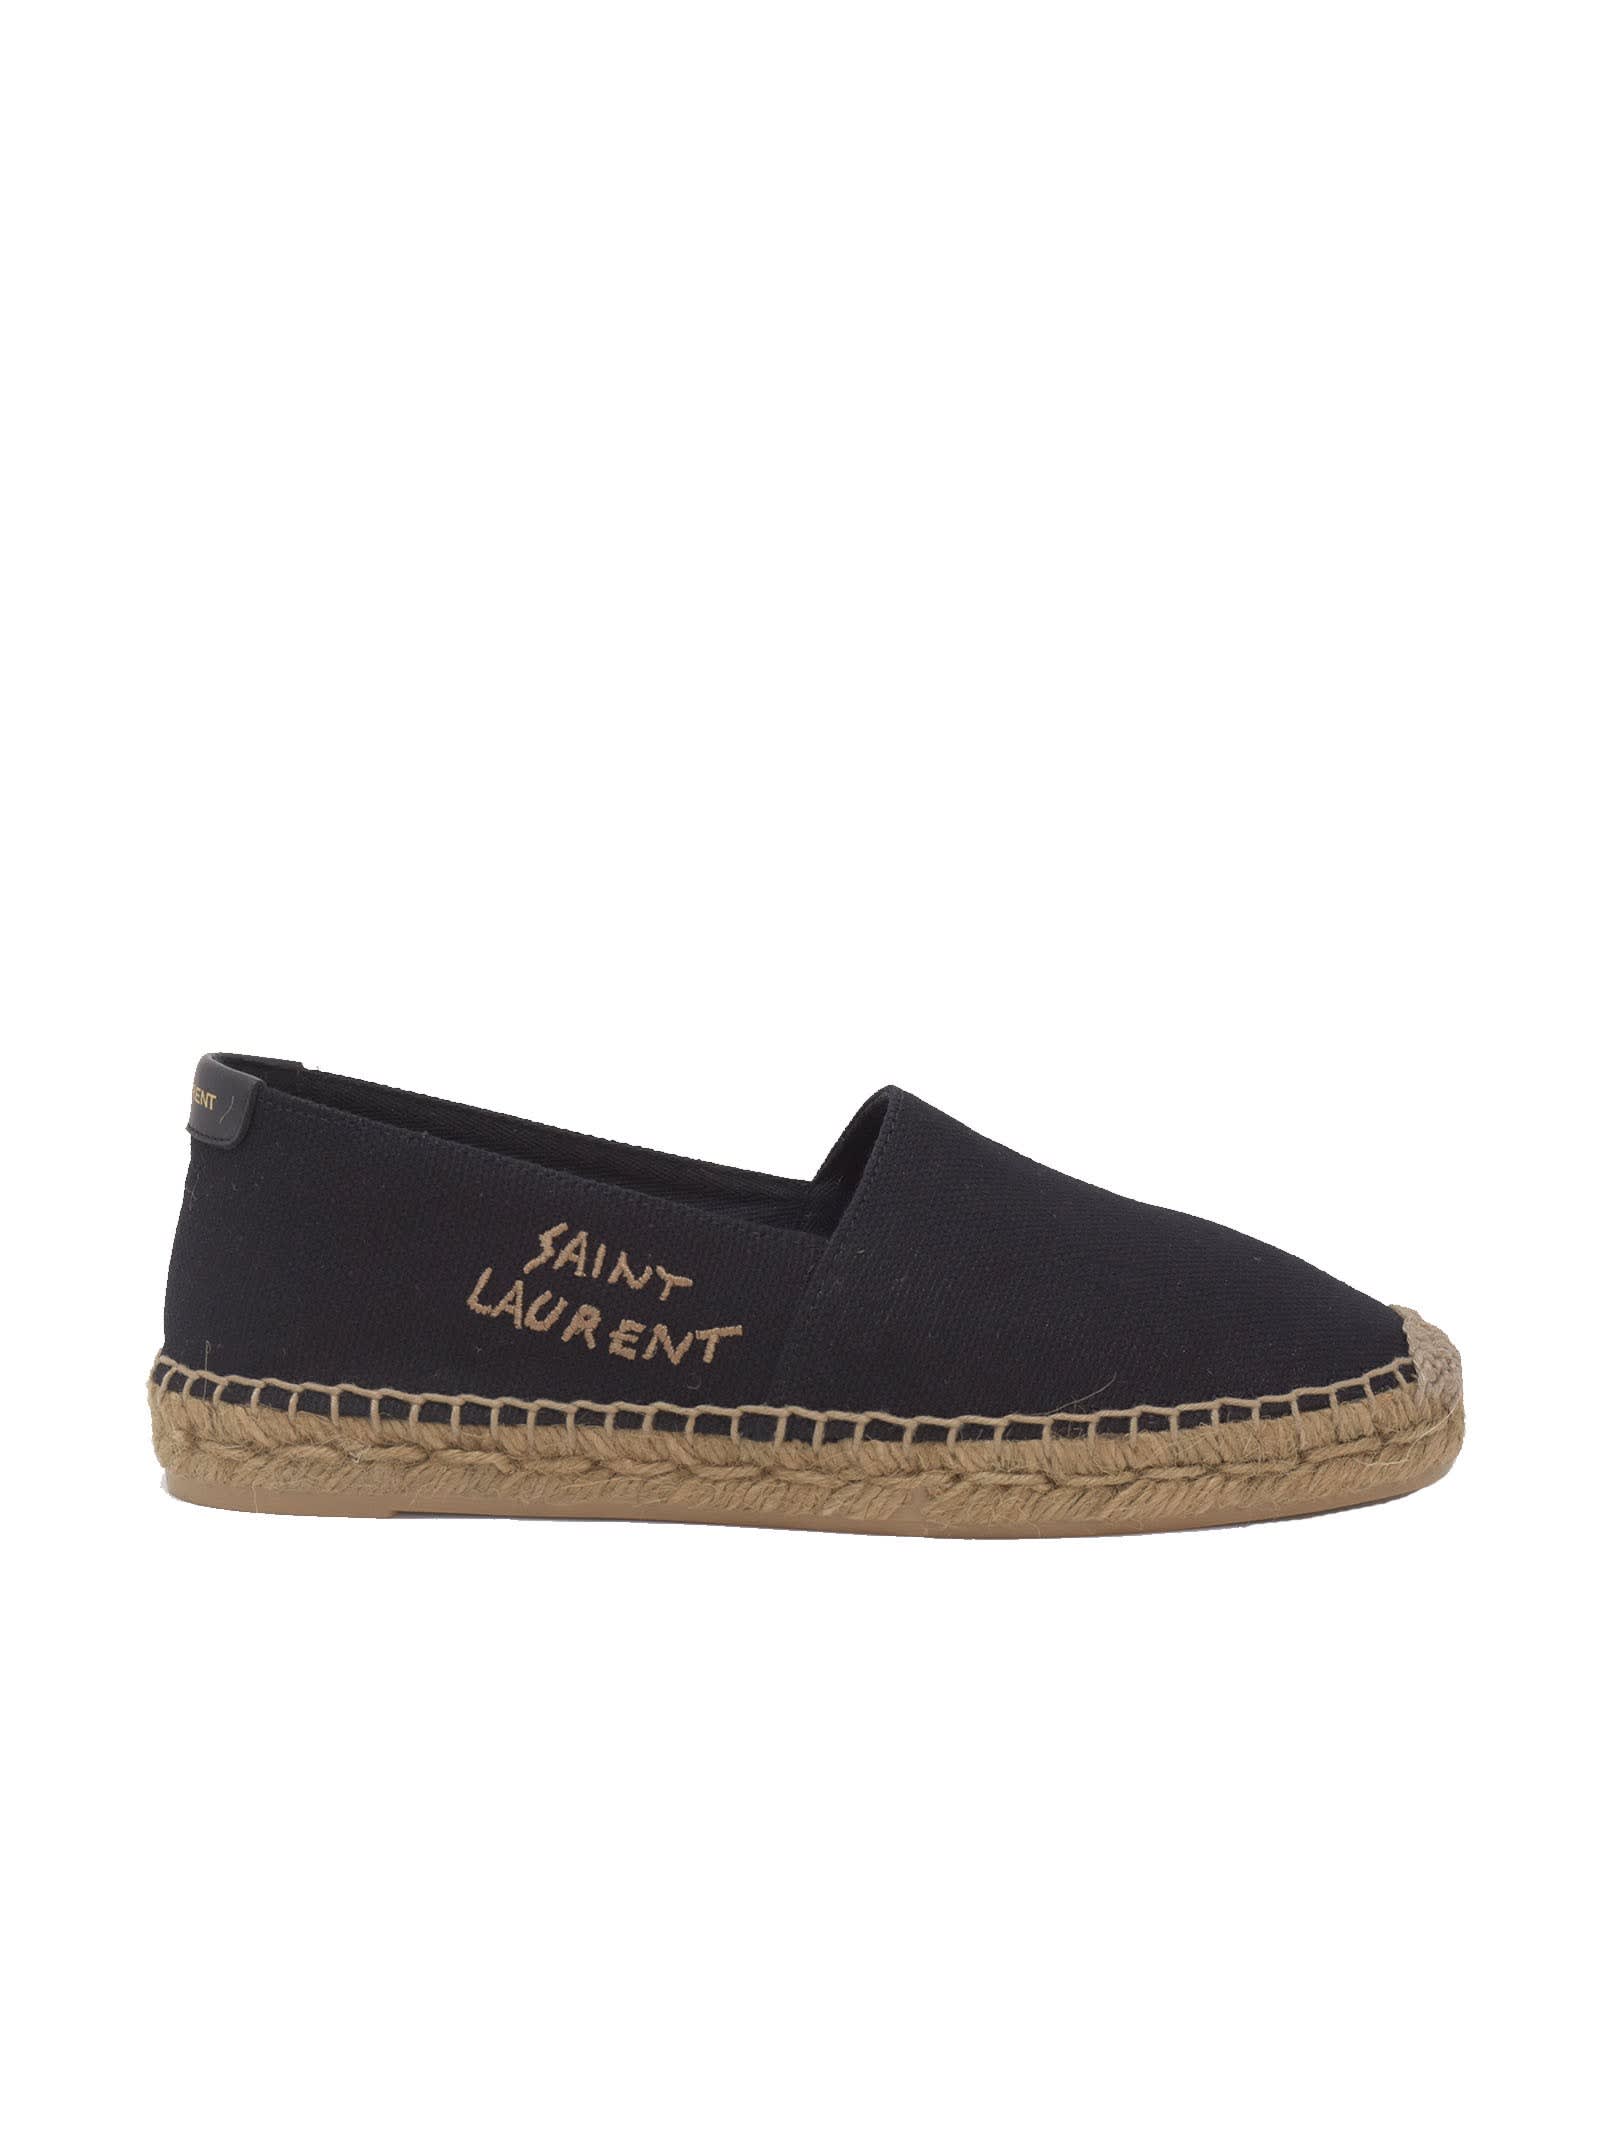 Buy Saint Laurent Embroidered Espadrilles In Black Canvas online, shop Saint Laurent shoes with free shipping